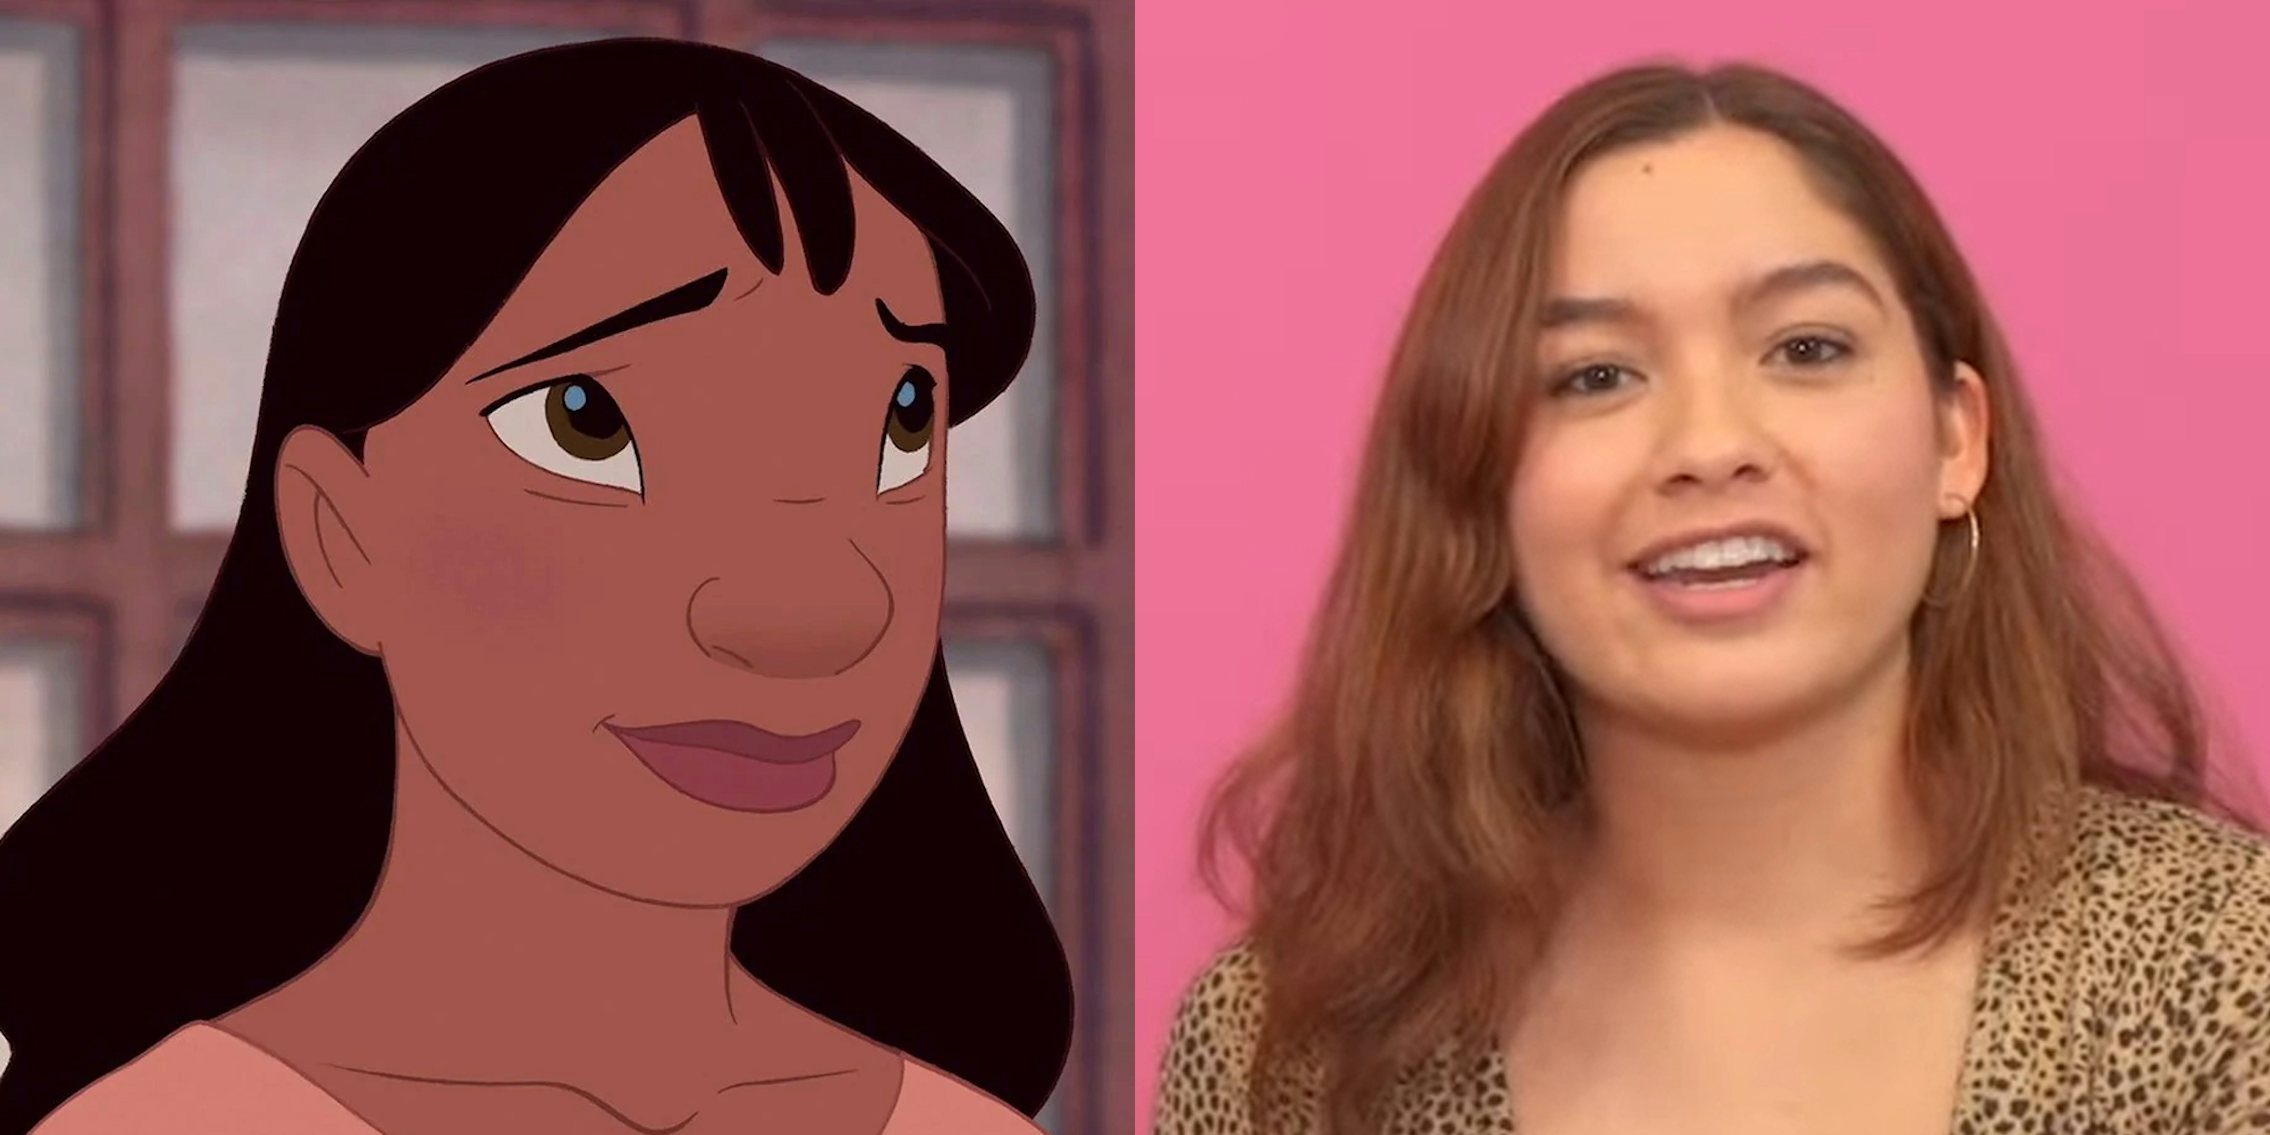 Fans Outraged By Disney's Live-Action Nani Cho for Lilo & Stitch